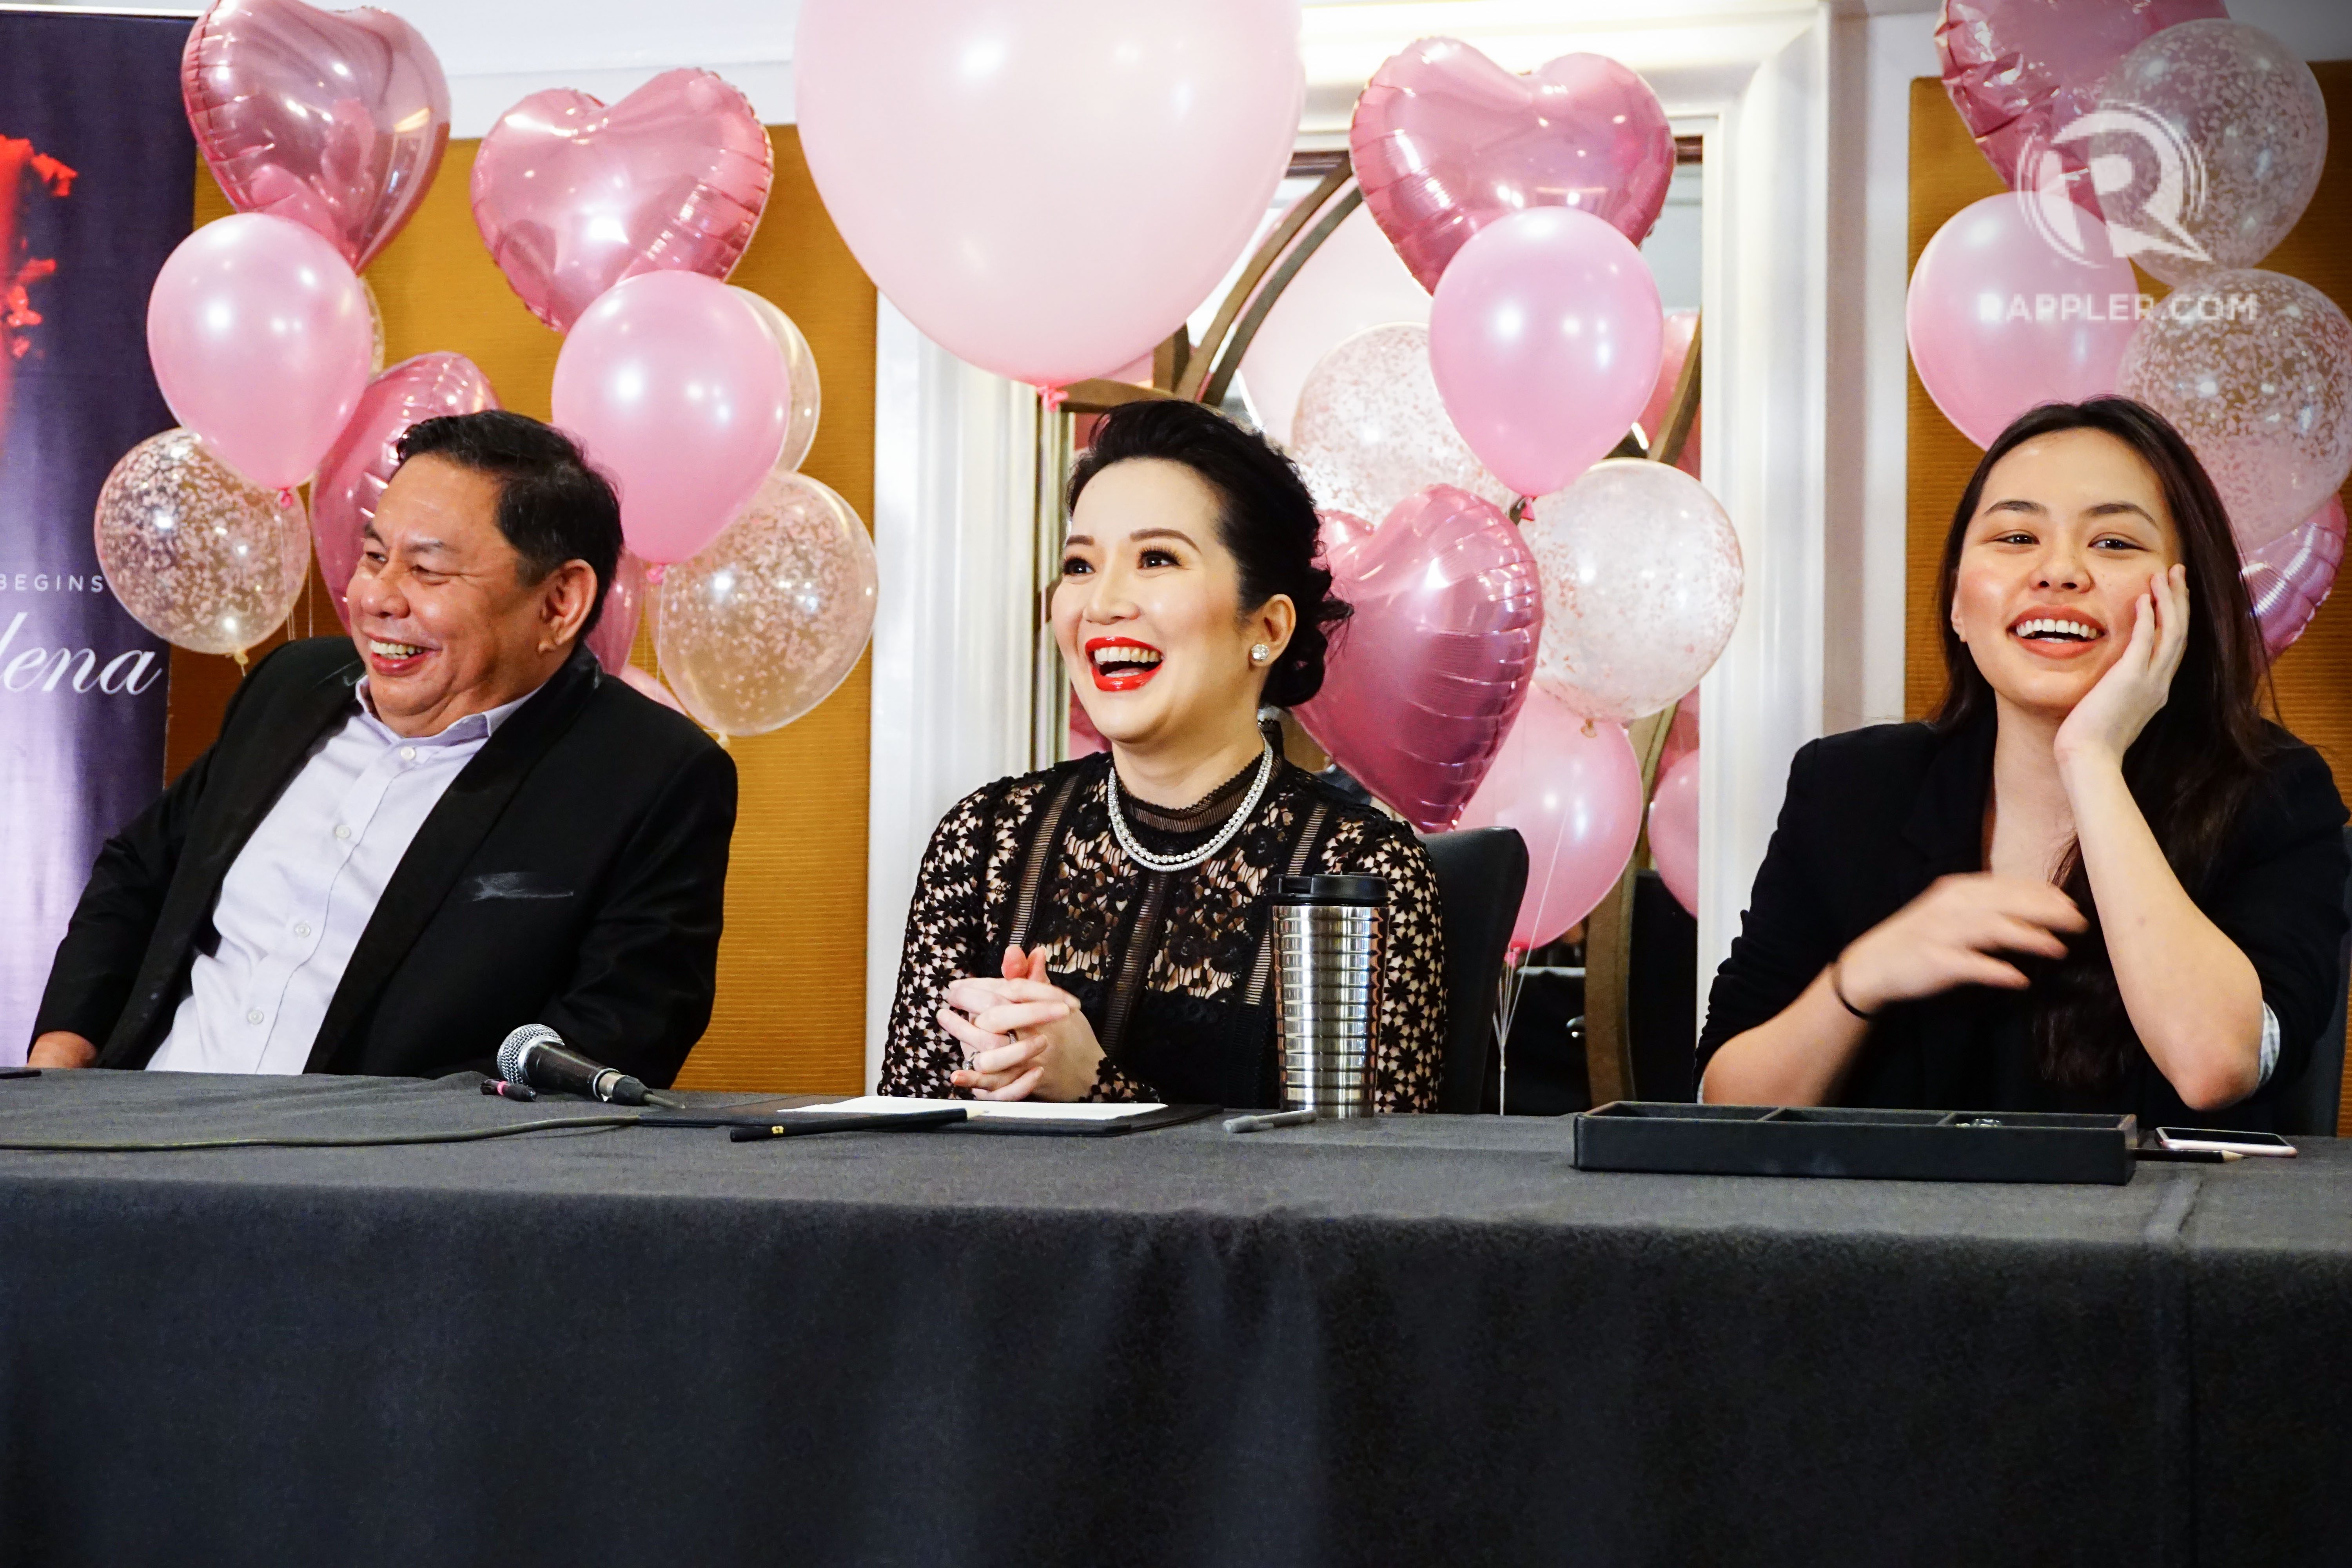 HAPPY MOMENTS. Kris Aquino speaks to the press at her contract signing with Ever Bilena. From left to right: Ever Bilena CEO Dioceldo Sy, Kris Aquino, Ever Bilena key accounts manager Denice Sy. Photo by Vernise L. Tantuco/Rappler 